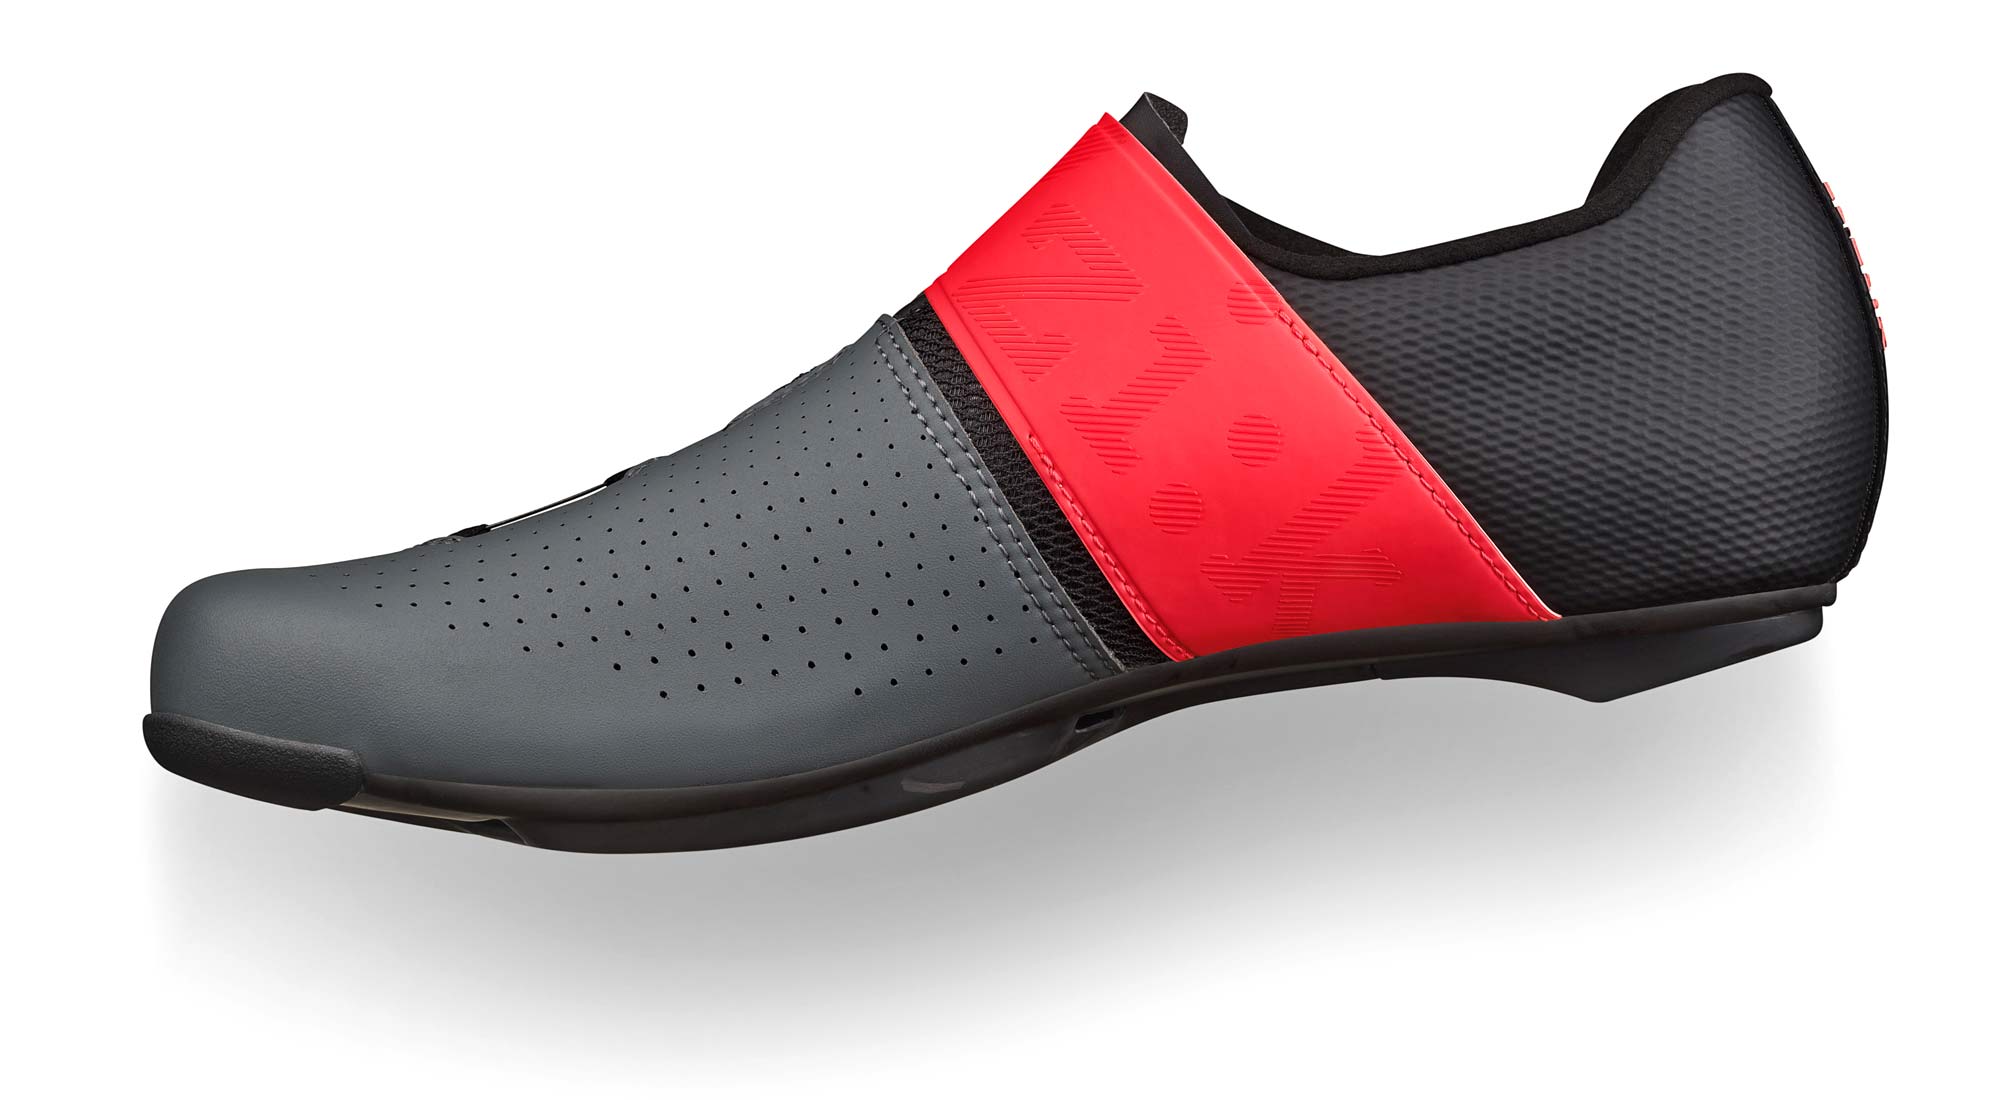 Fizik Vento Infinito Carbon 2 road shoes, lightweight breathable stiff, microtex or knit road racing shoes, inside